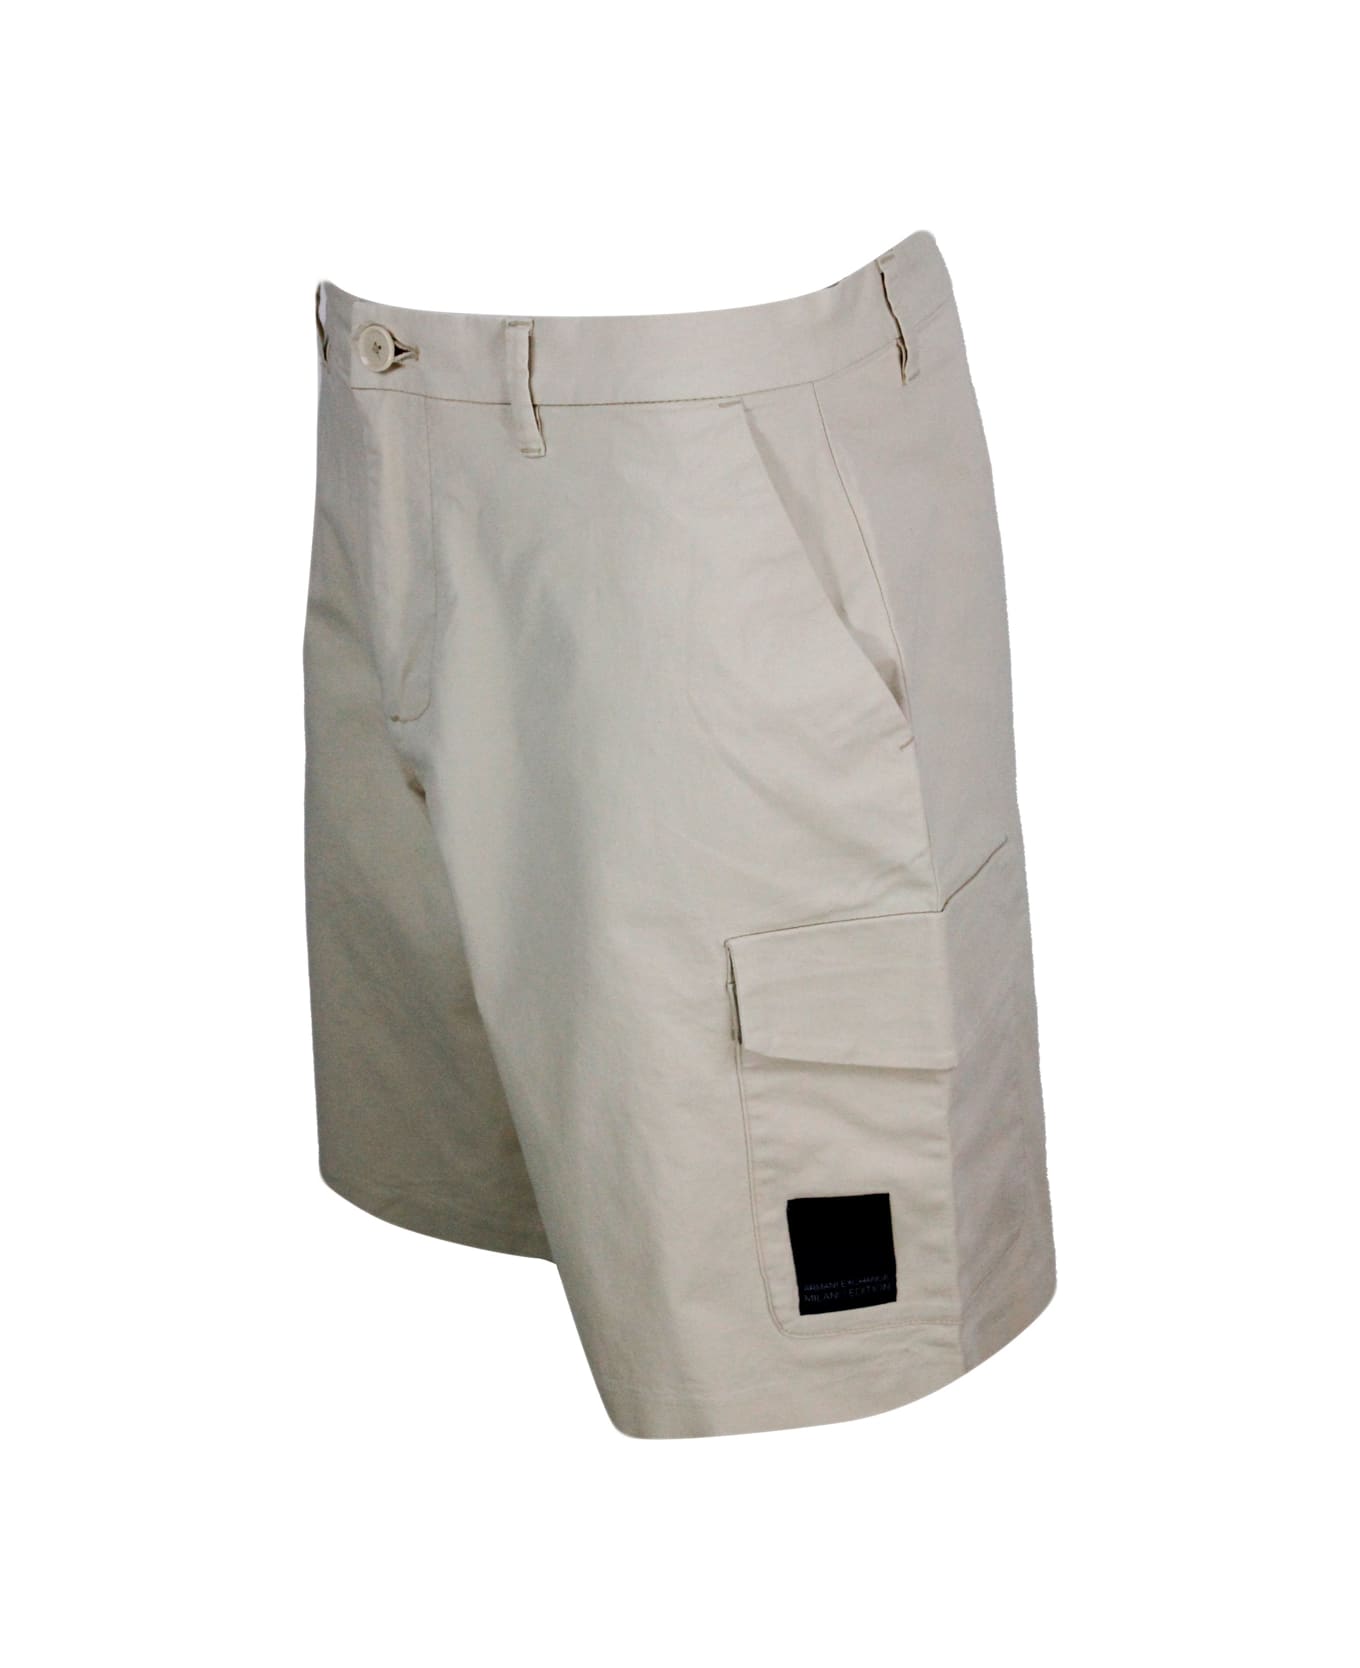 Armani Collezioni Stretch Cotton Bermuda Shorts, Cargo Model With Large Pockets On The Leg And Zip And Button Closure - Beige ショートパンツ